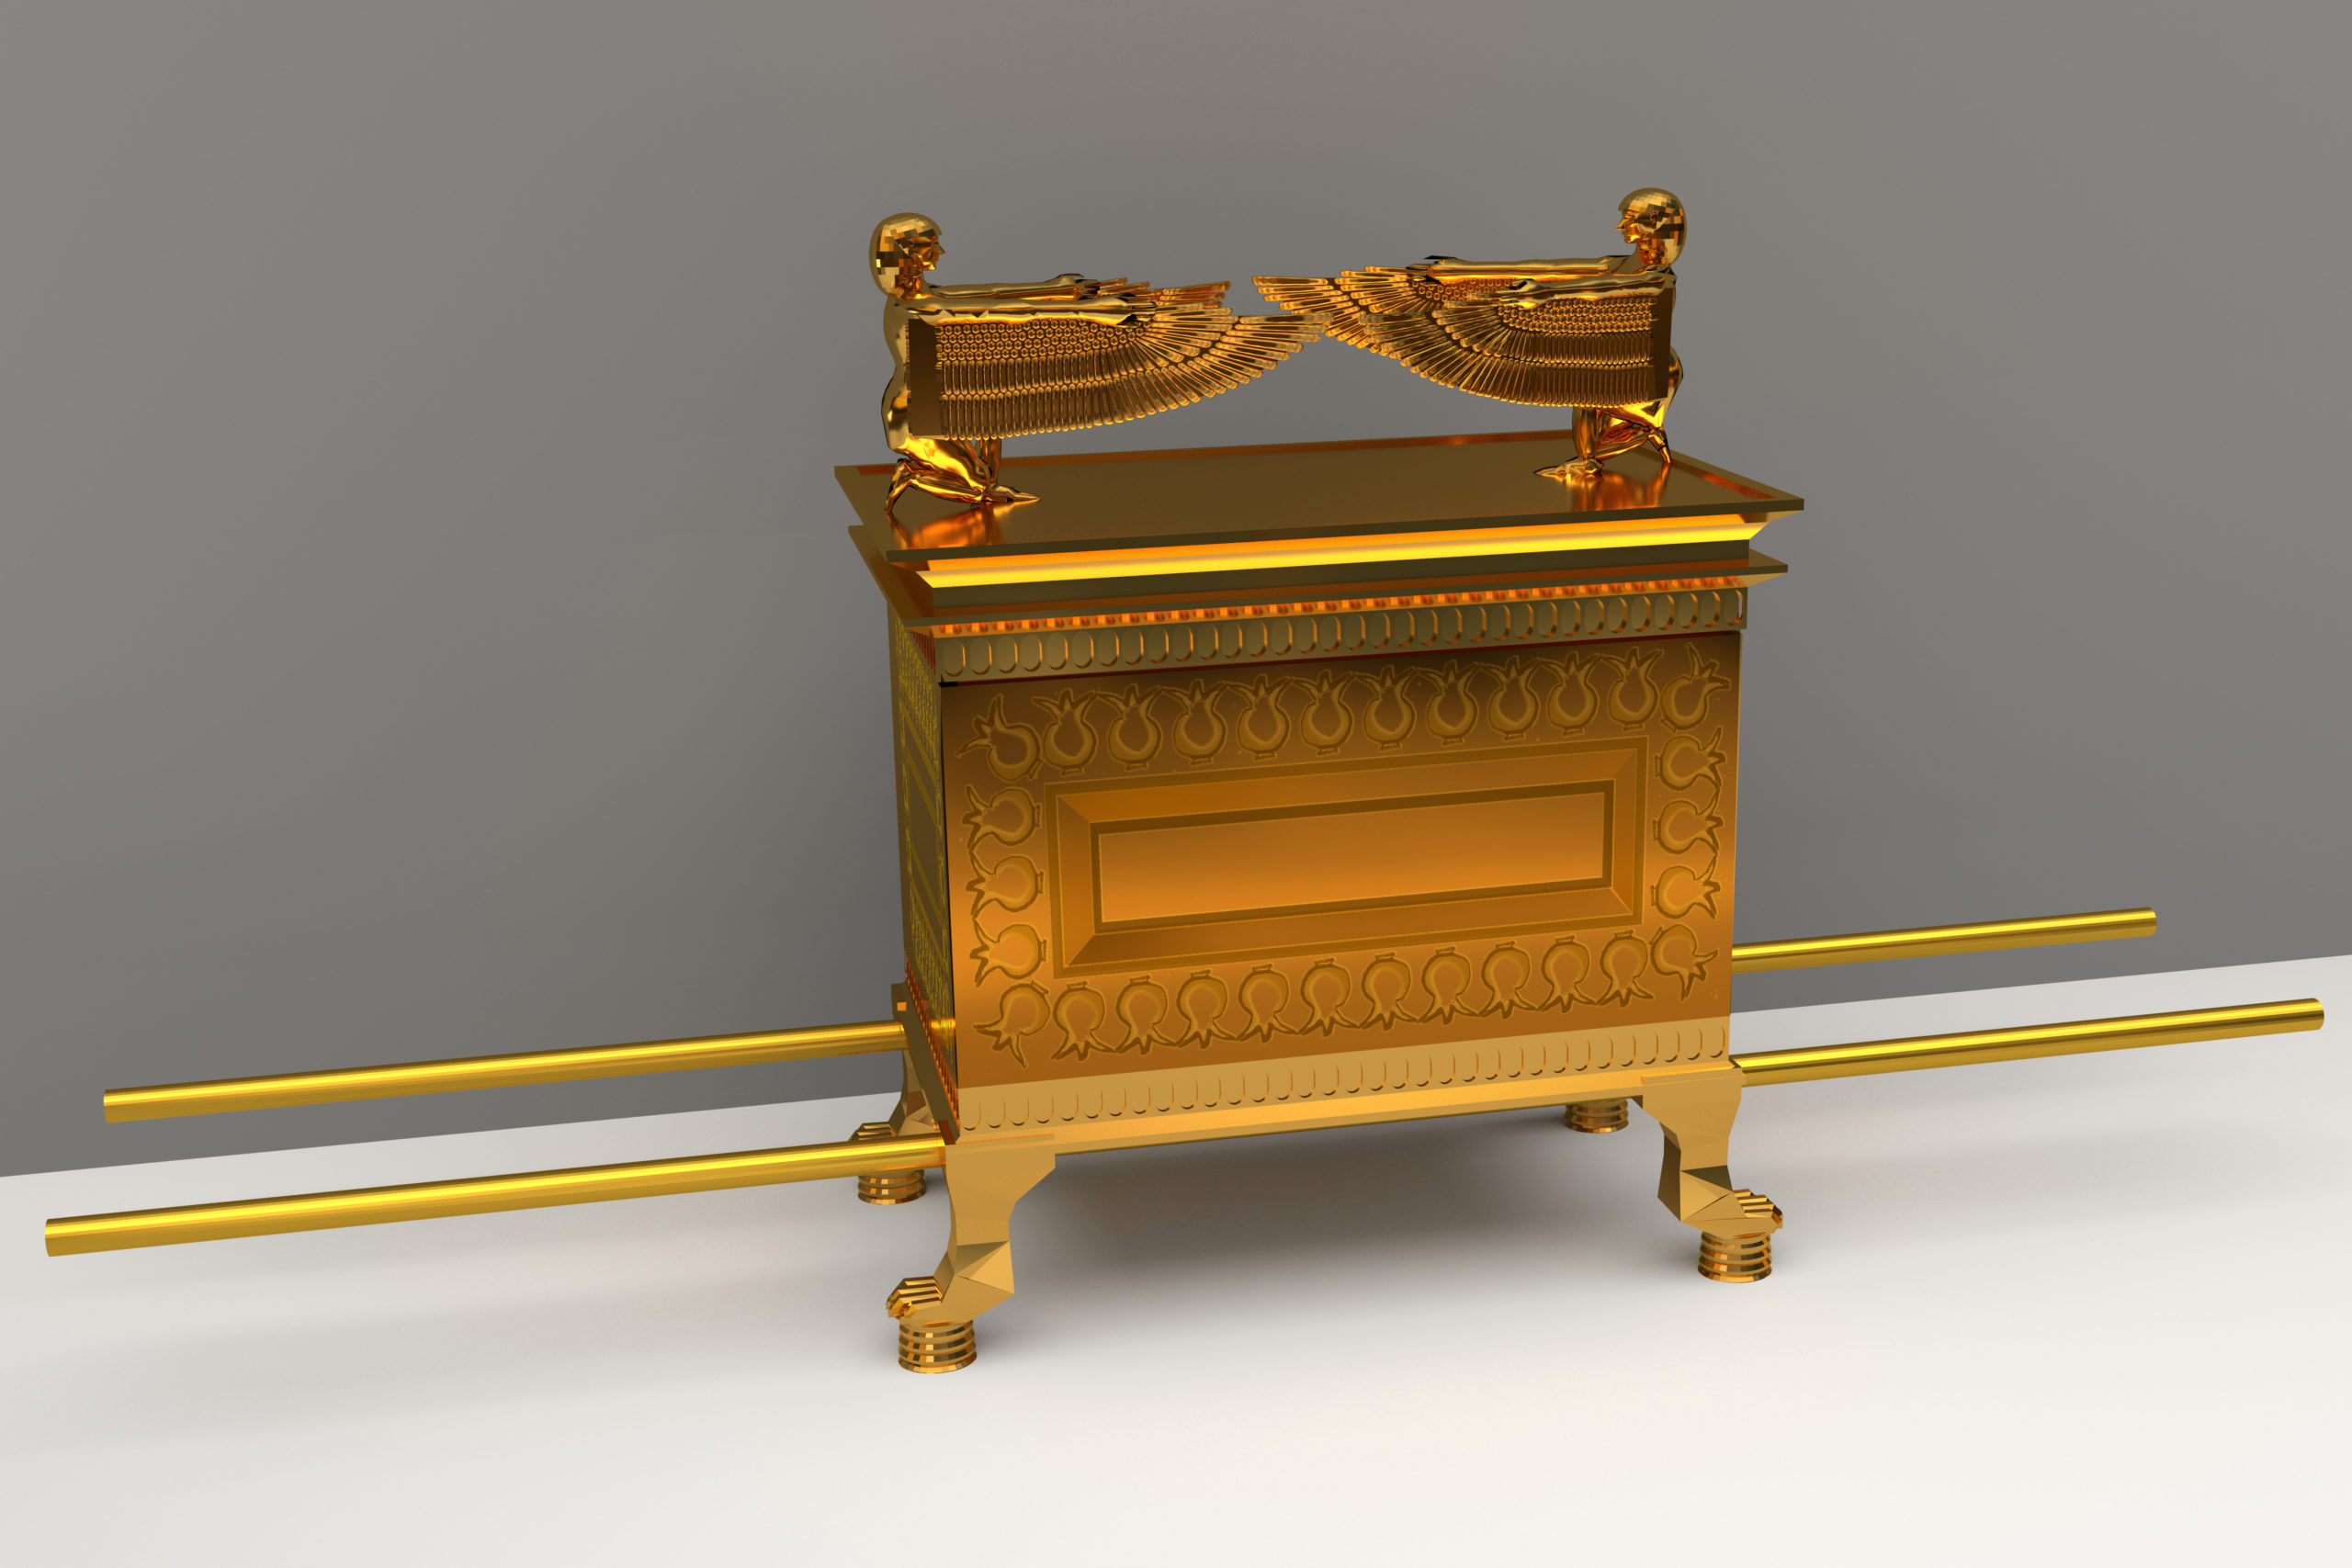 The Ark of the Covenant in its Egyptian Context